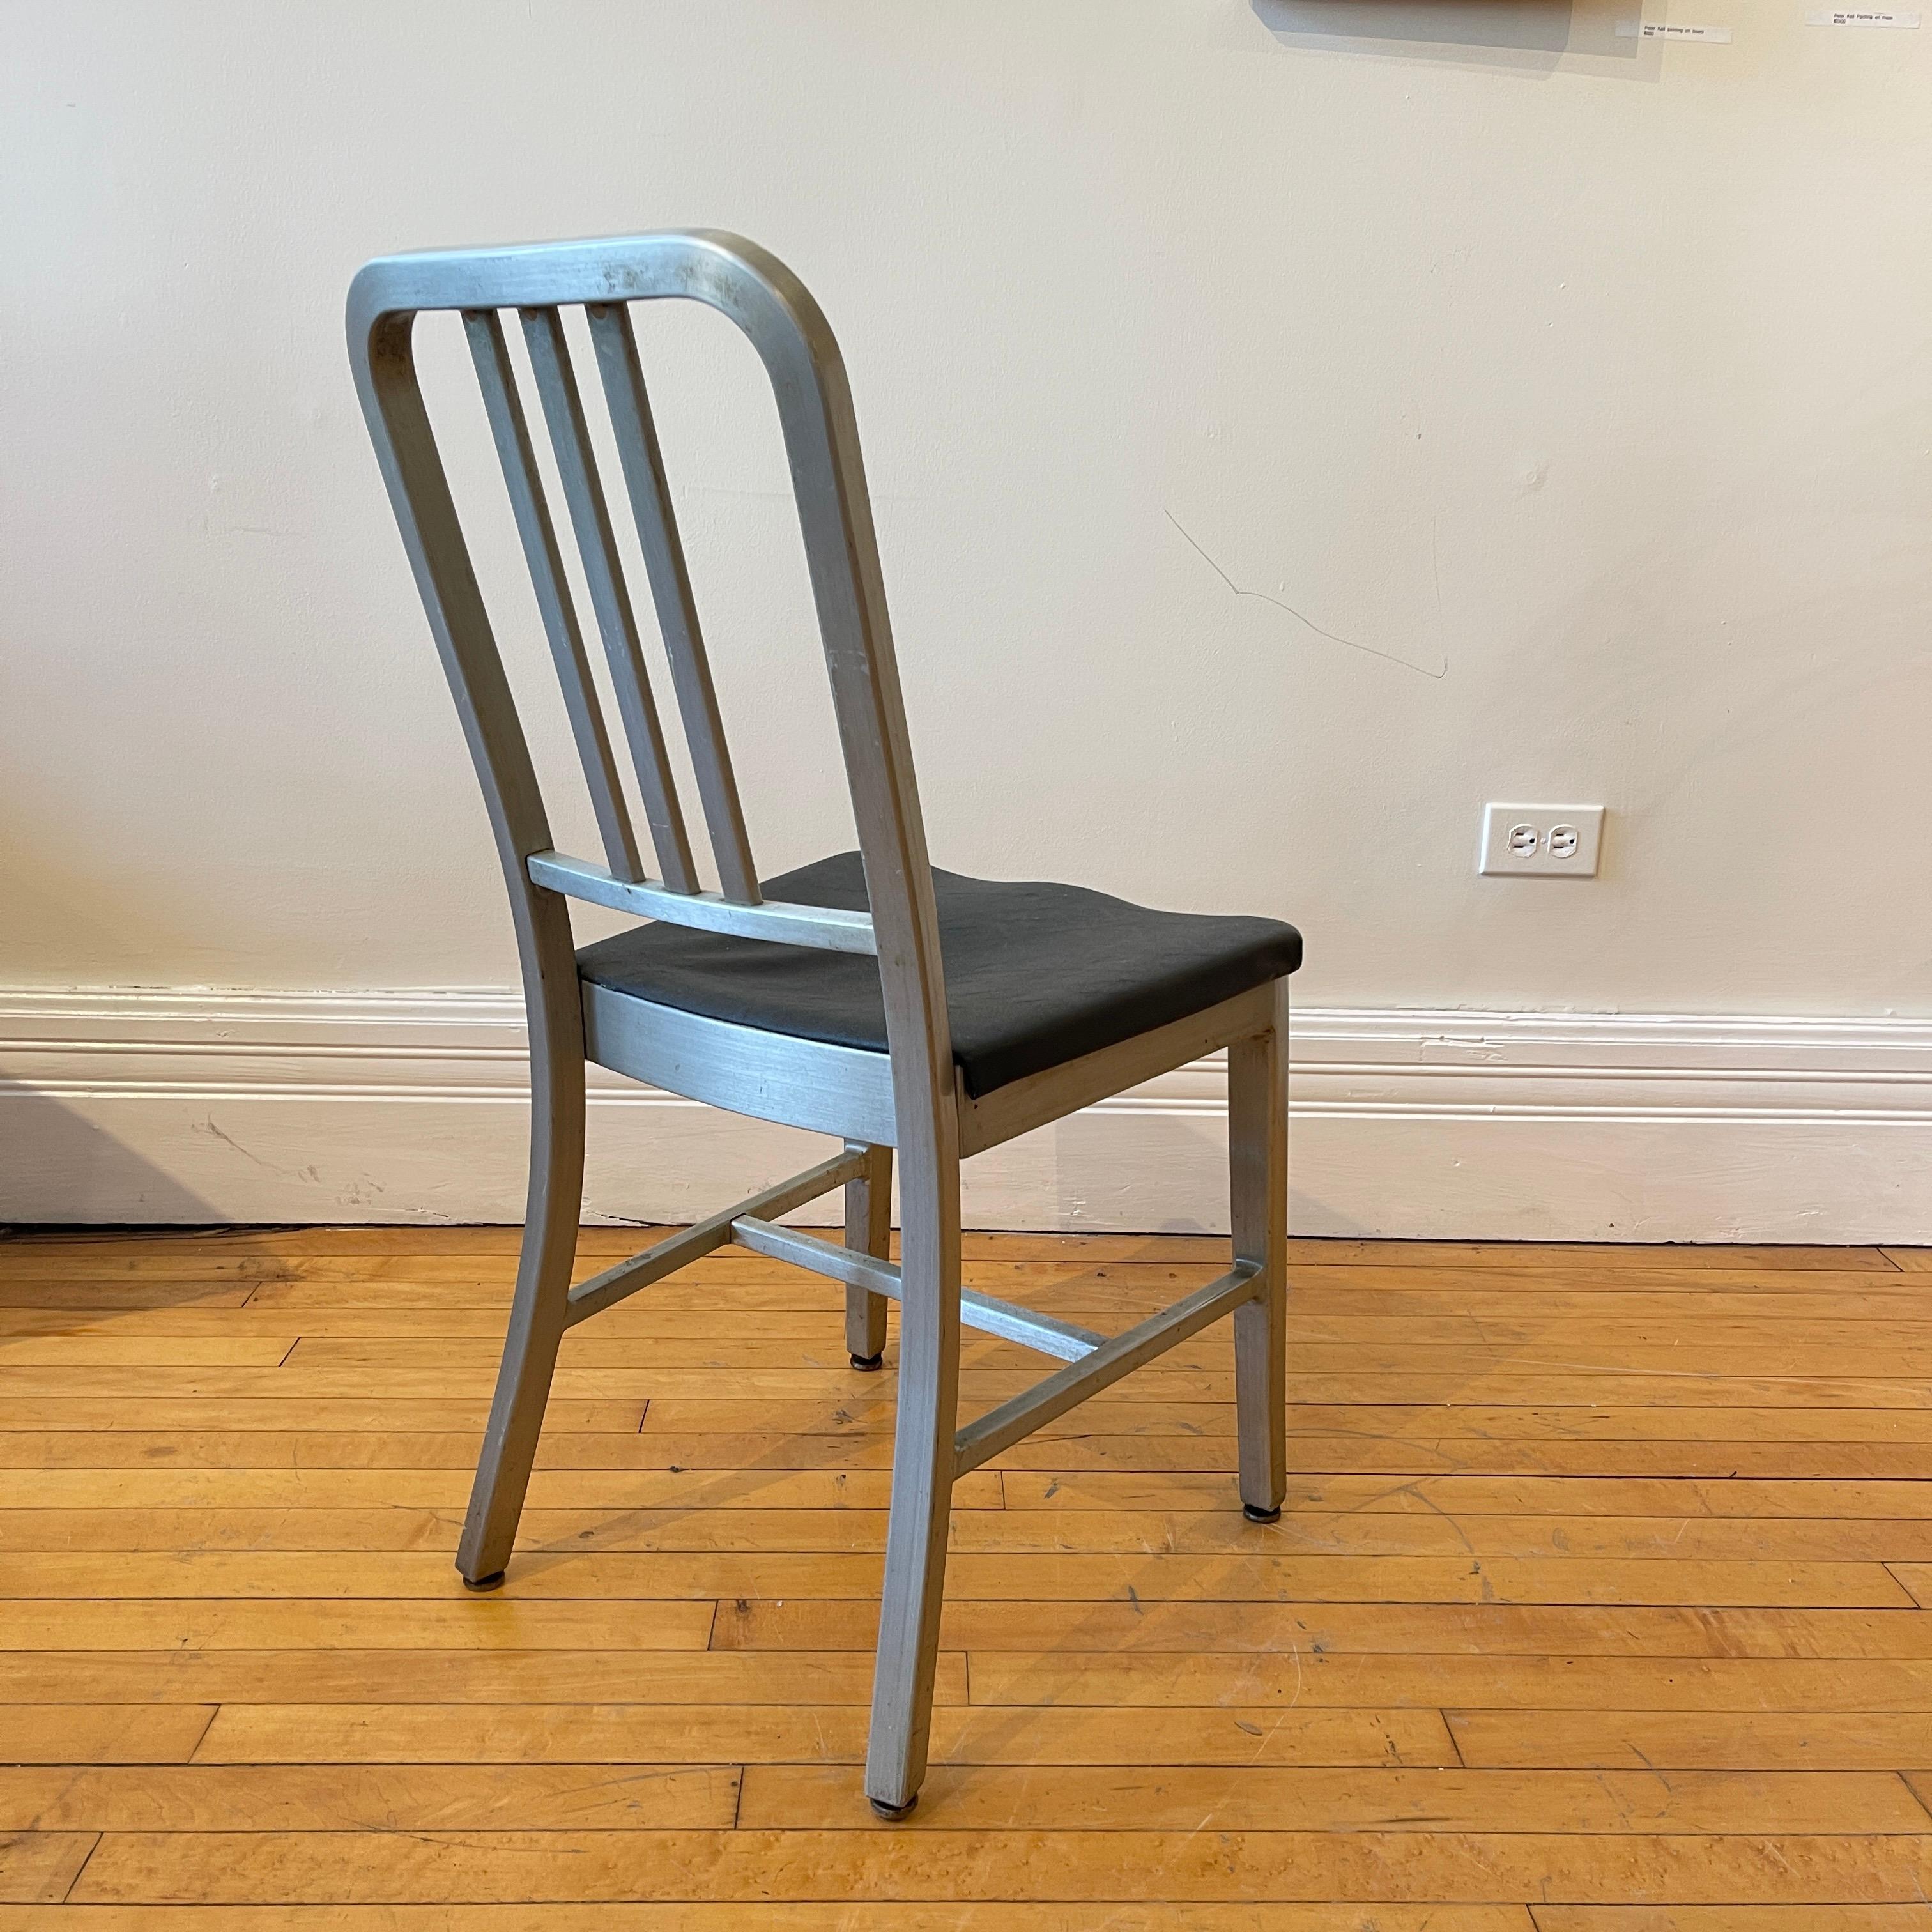 Machine Age Early Original Navy Chairs by Goodform / General Fireproofing 60 Available